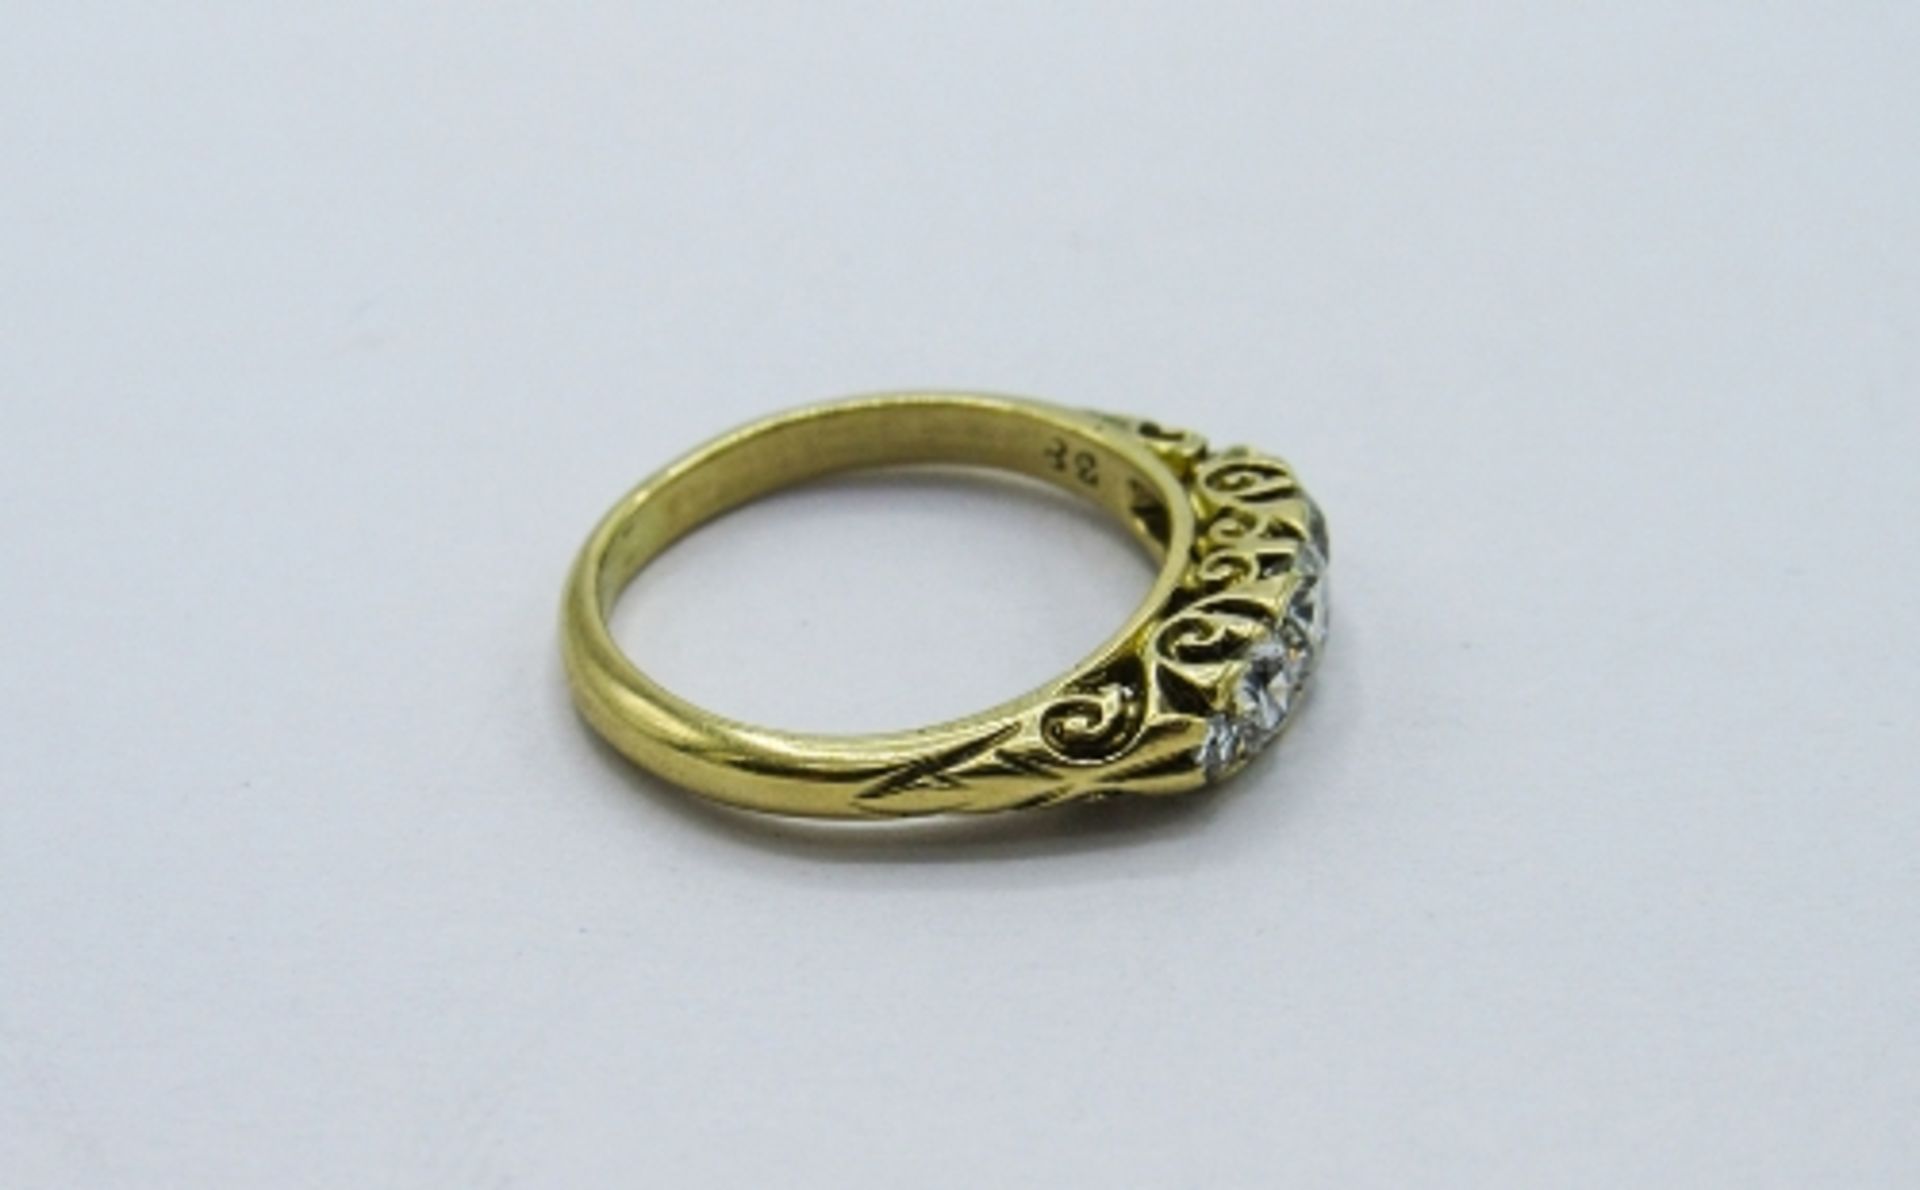 5 stone old cut diamond ring, approx 1/2 carat, set in yellow metal, weight 3.4gms, size J 1/2. - Image 3 of 4